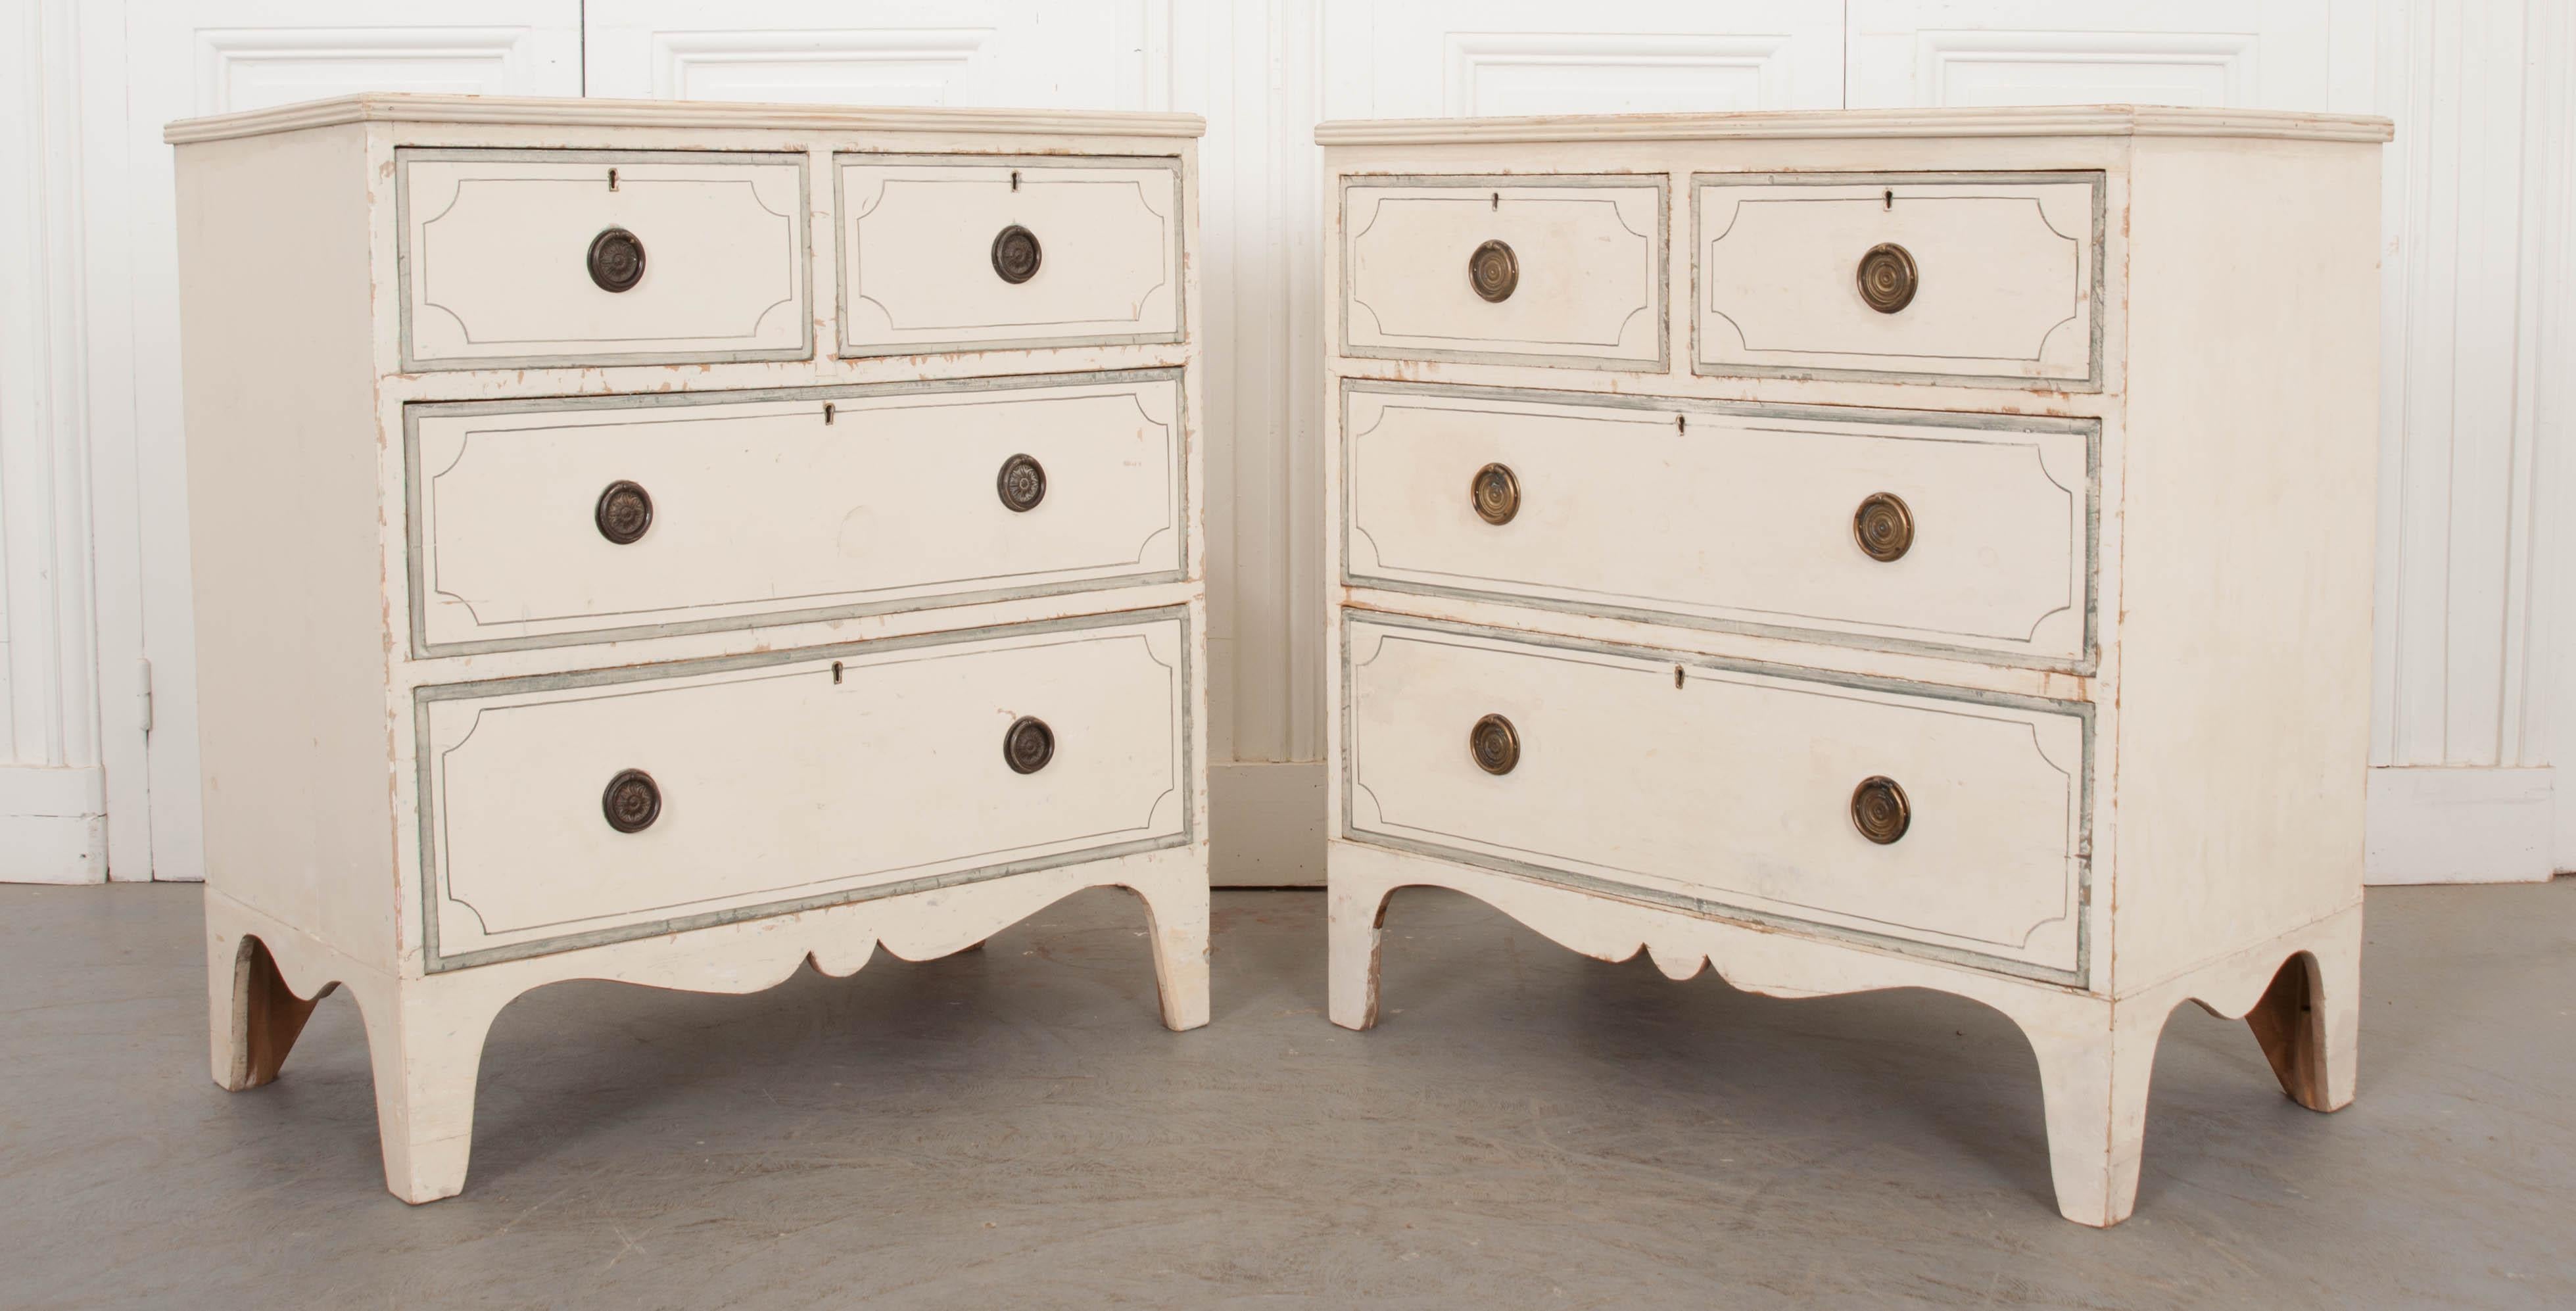 Pair of English Early 20th Century Edwardian Chests of Drawers (Farbe)